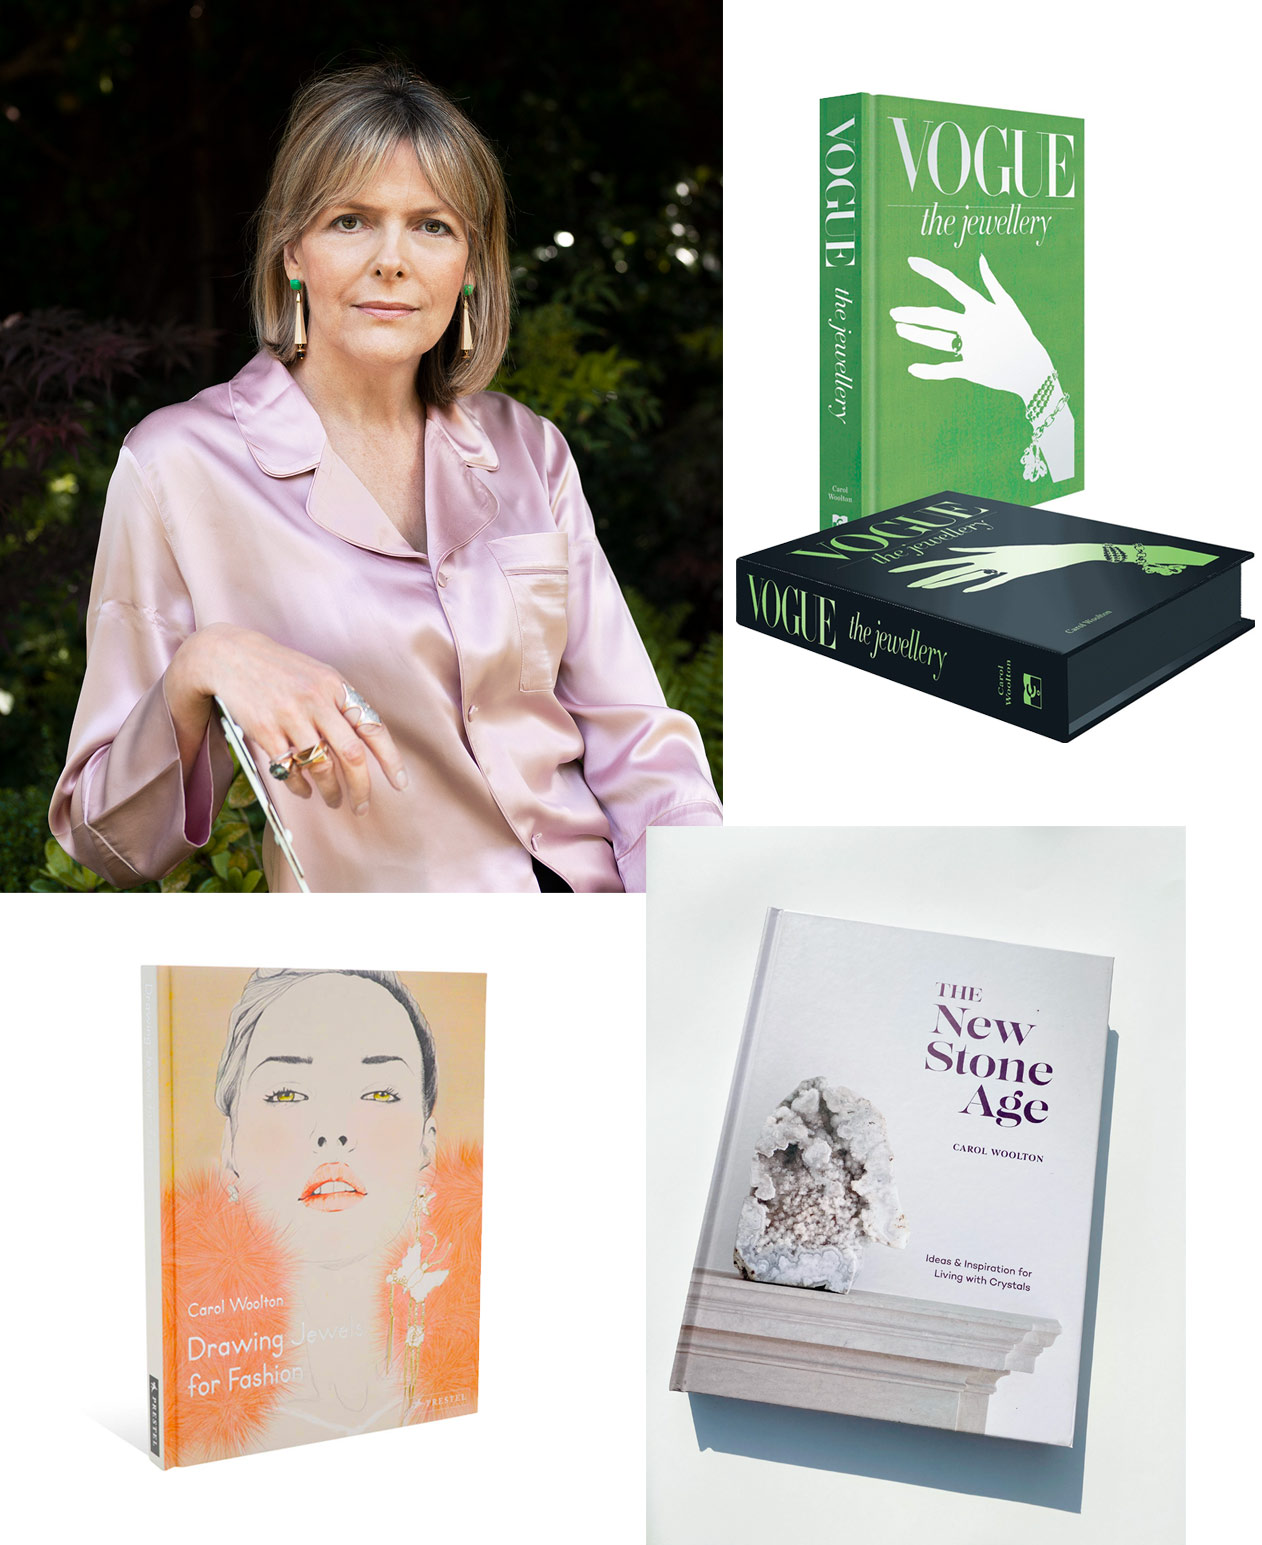 Carol Woolton is a contributing editor to British Vogue and is the author of five books, including The New Stone Age